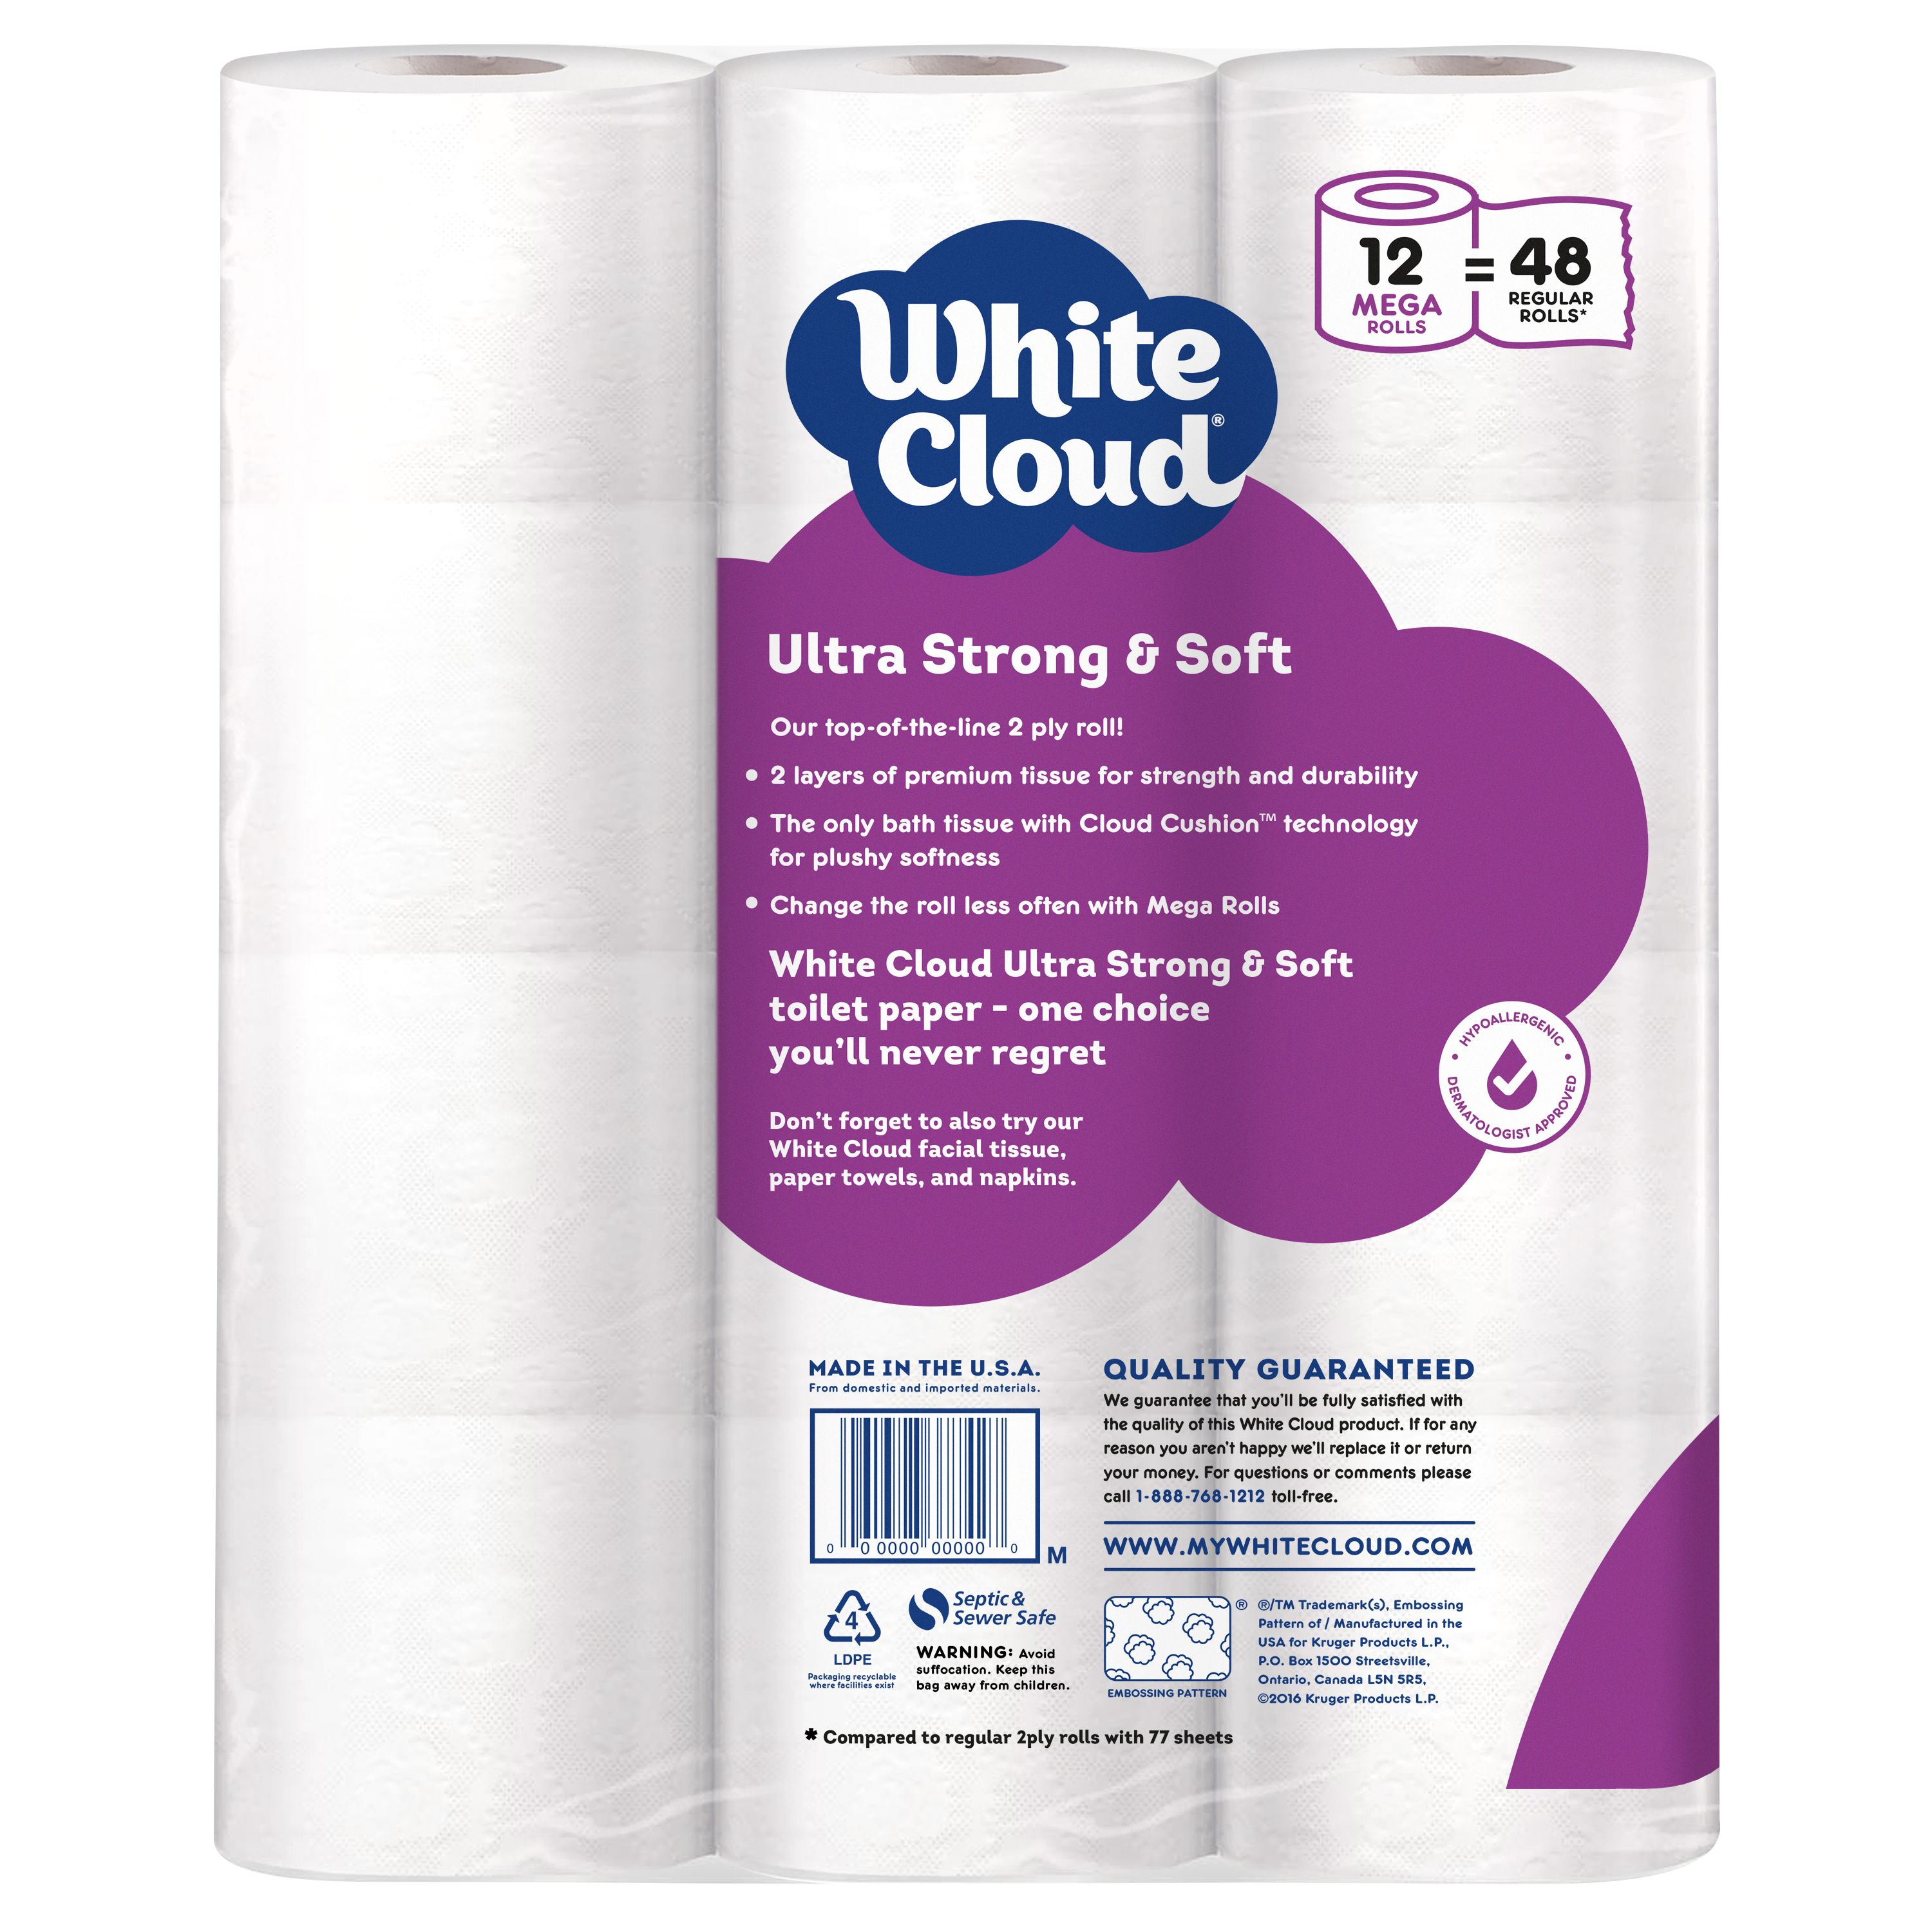 White Cloud Ultra Strong & Soft Toilet Paper, 12 Mega Rolls - image 2 of 6